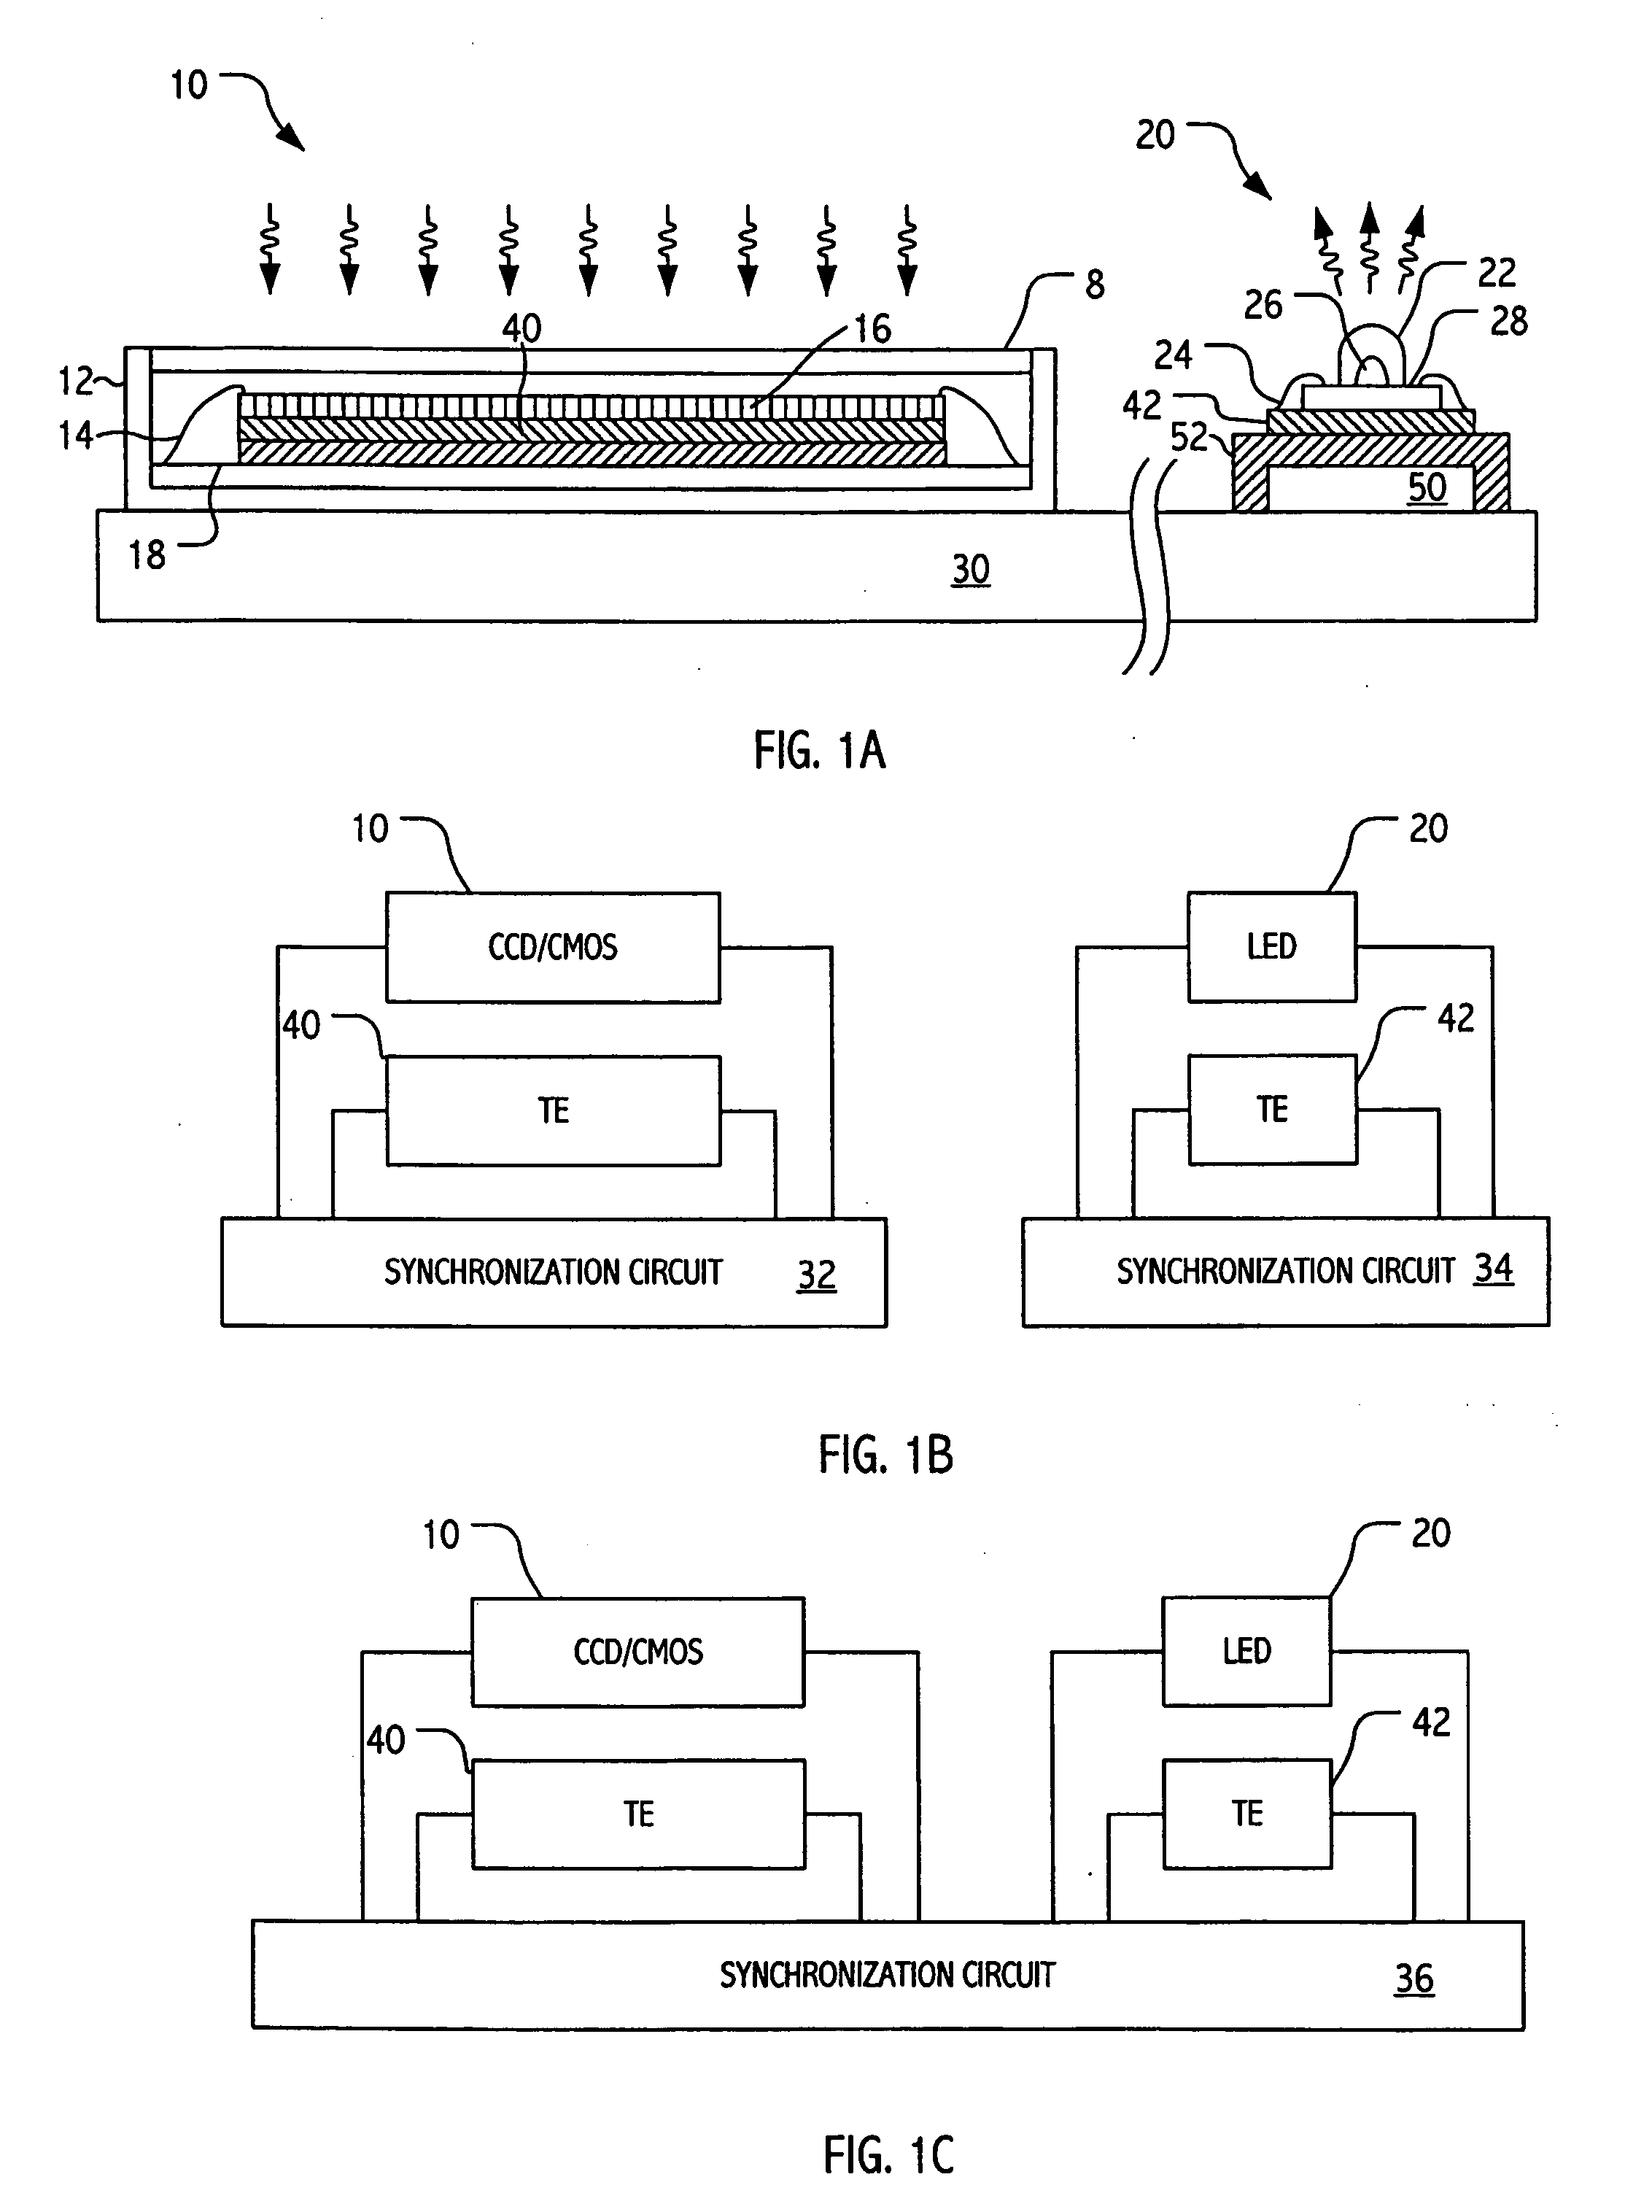 Thermoelectric cooling and/or moderation of transient thermal load using phase change material